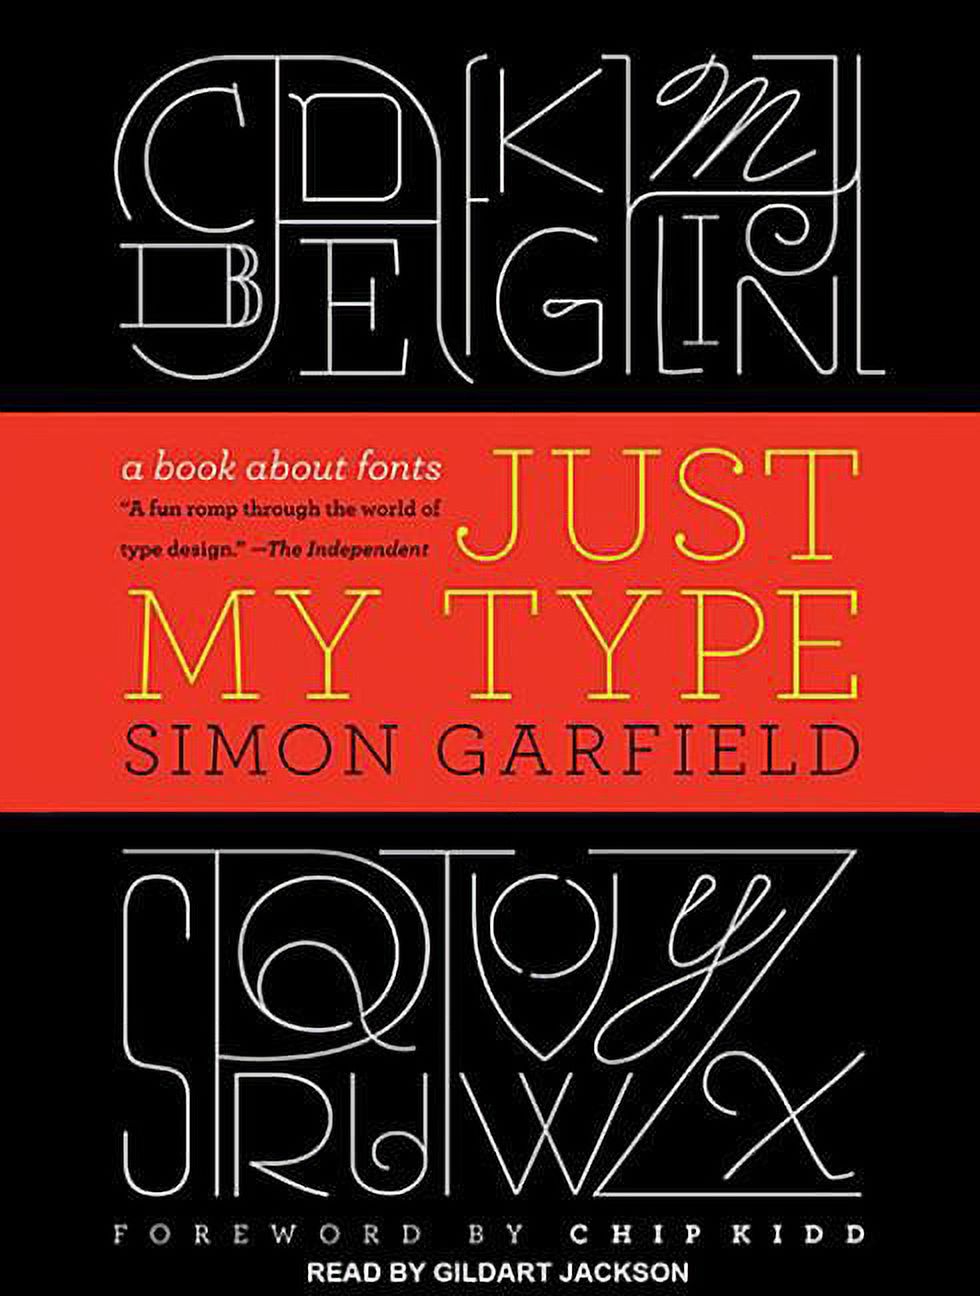 about　Just　A　My　Type　Book　Fonts